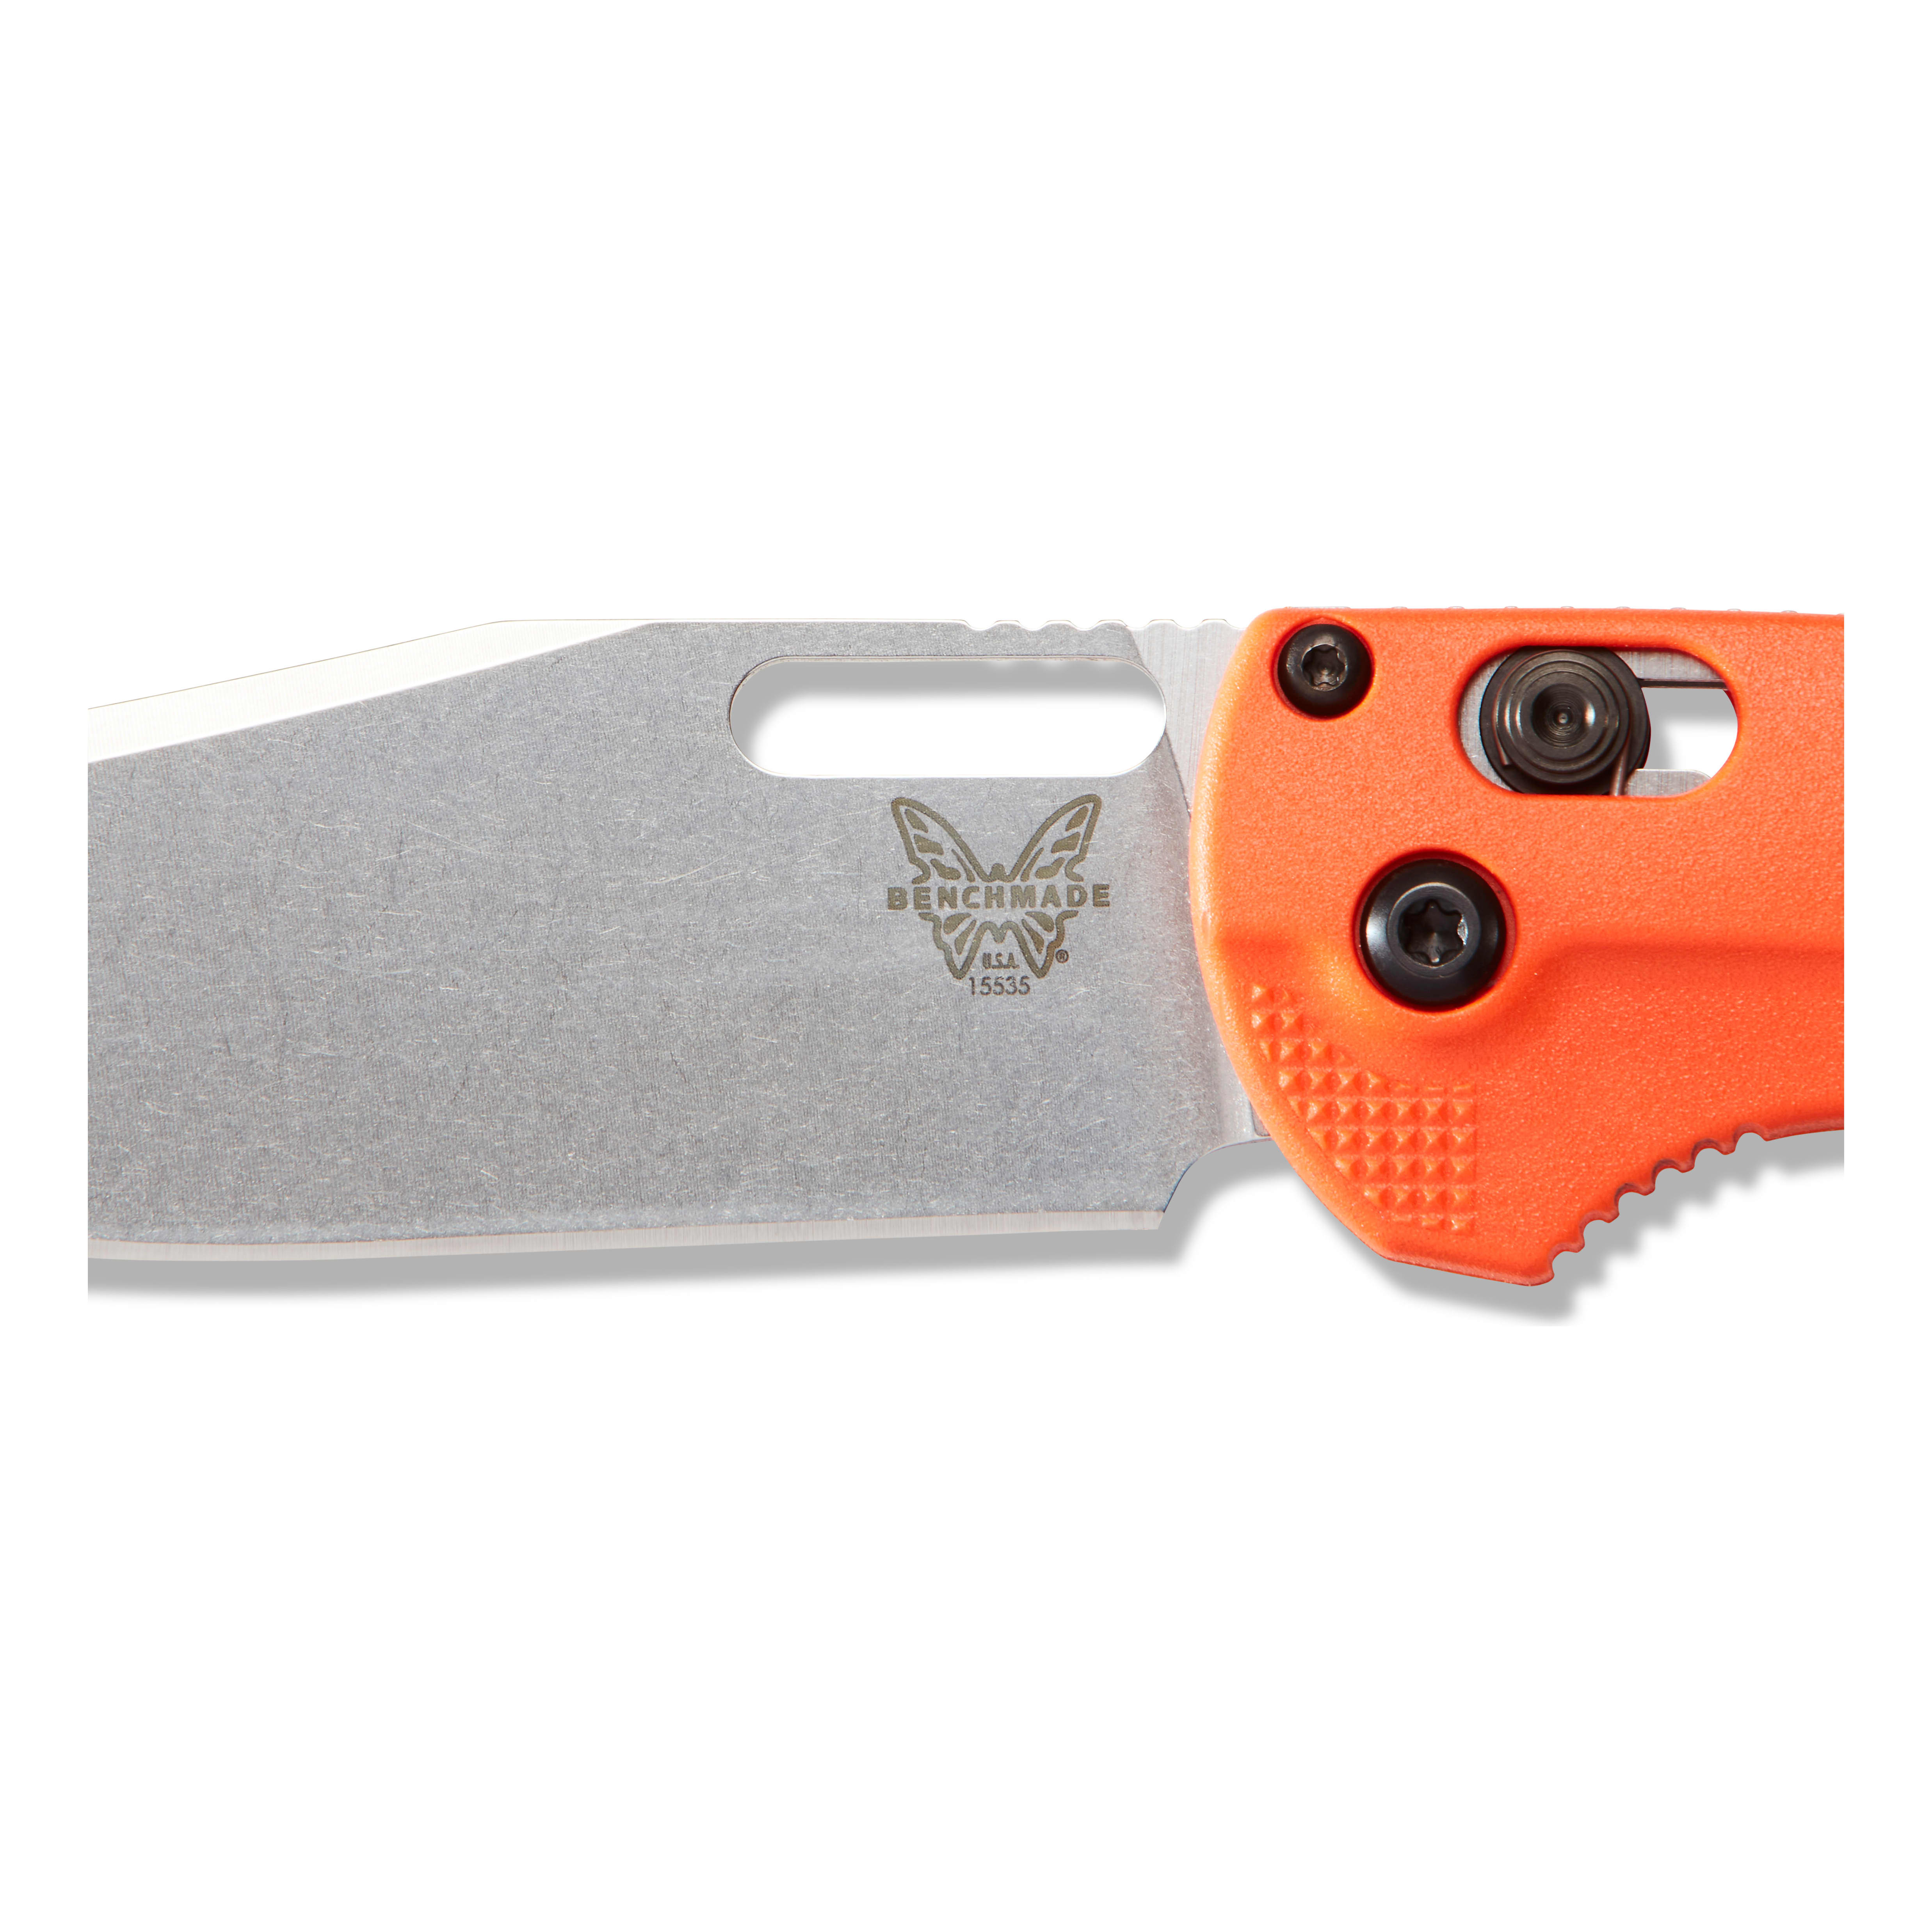 Benchmade® Taggedout™ Folding Knife